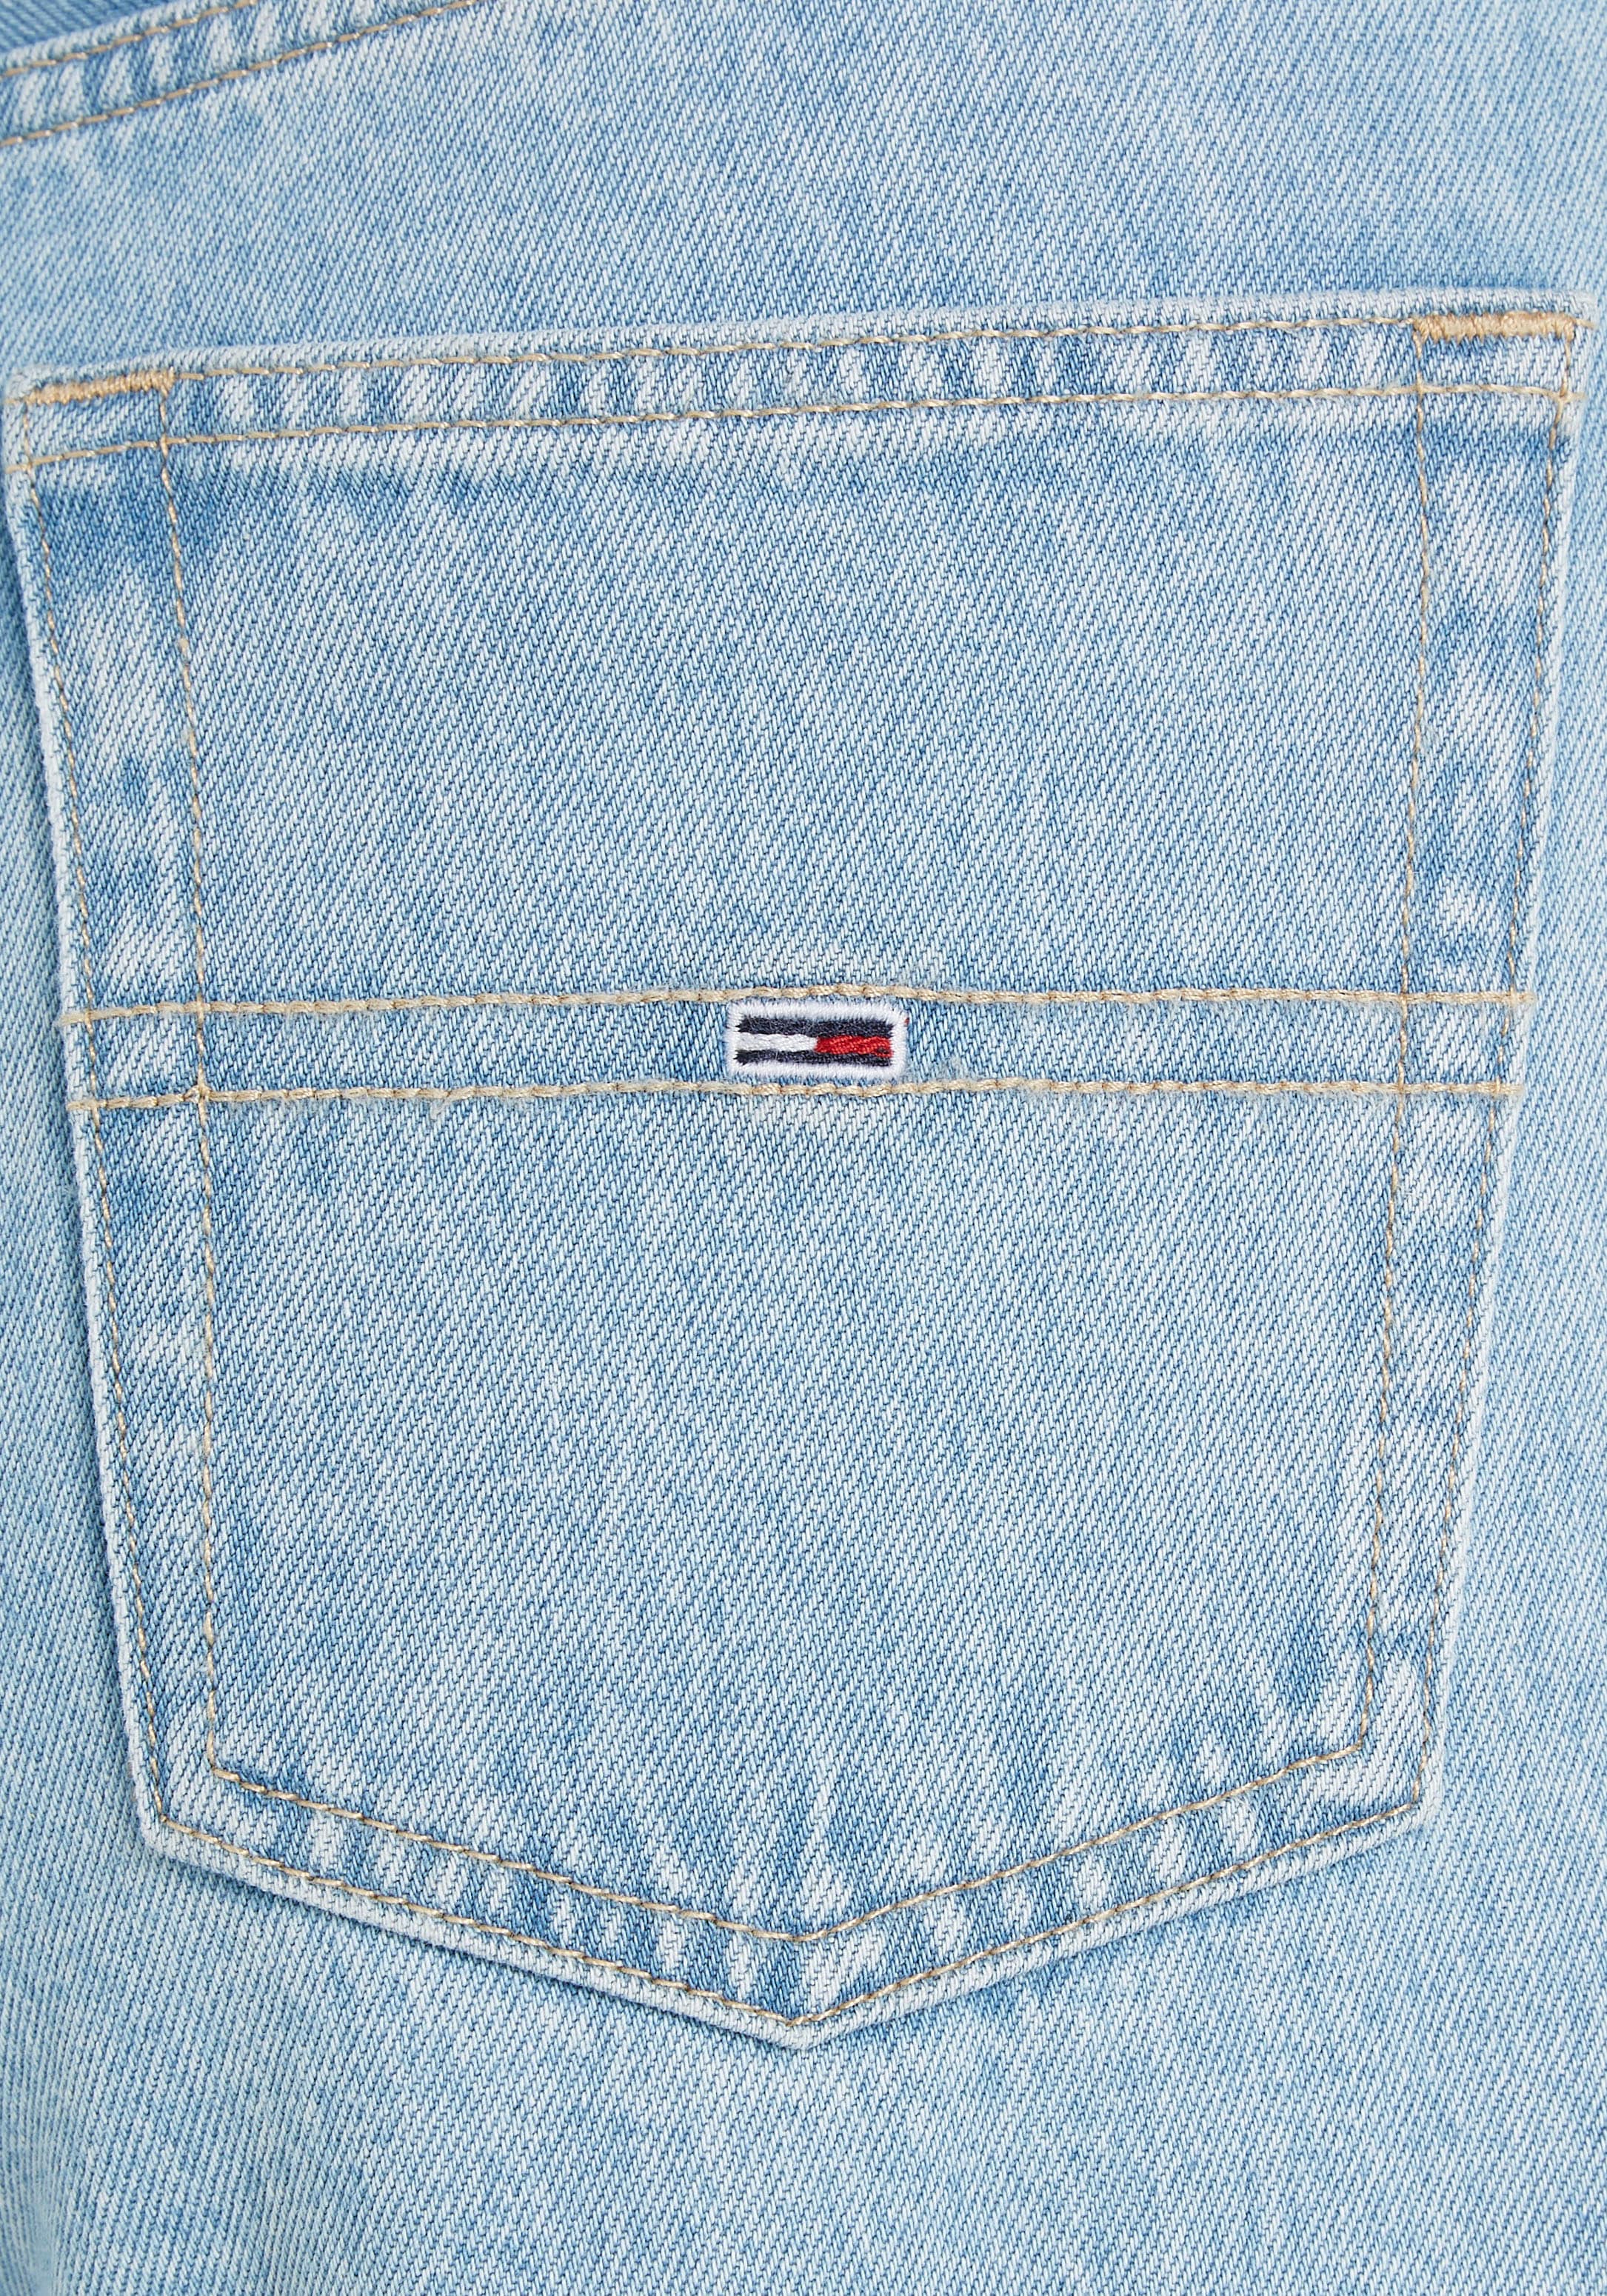 Tommy | Logobadges Weite kaufen Jeans, Jeans Tommy Jeans UNIVERSAL mit online